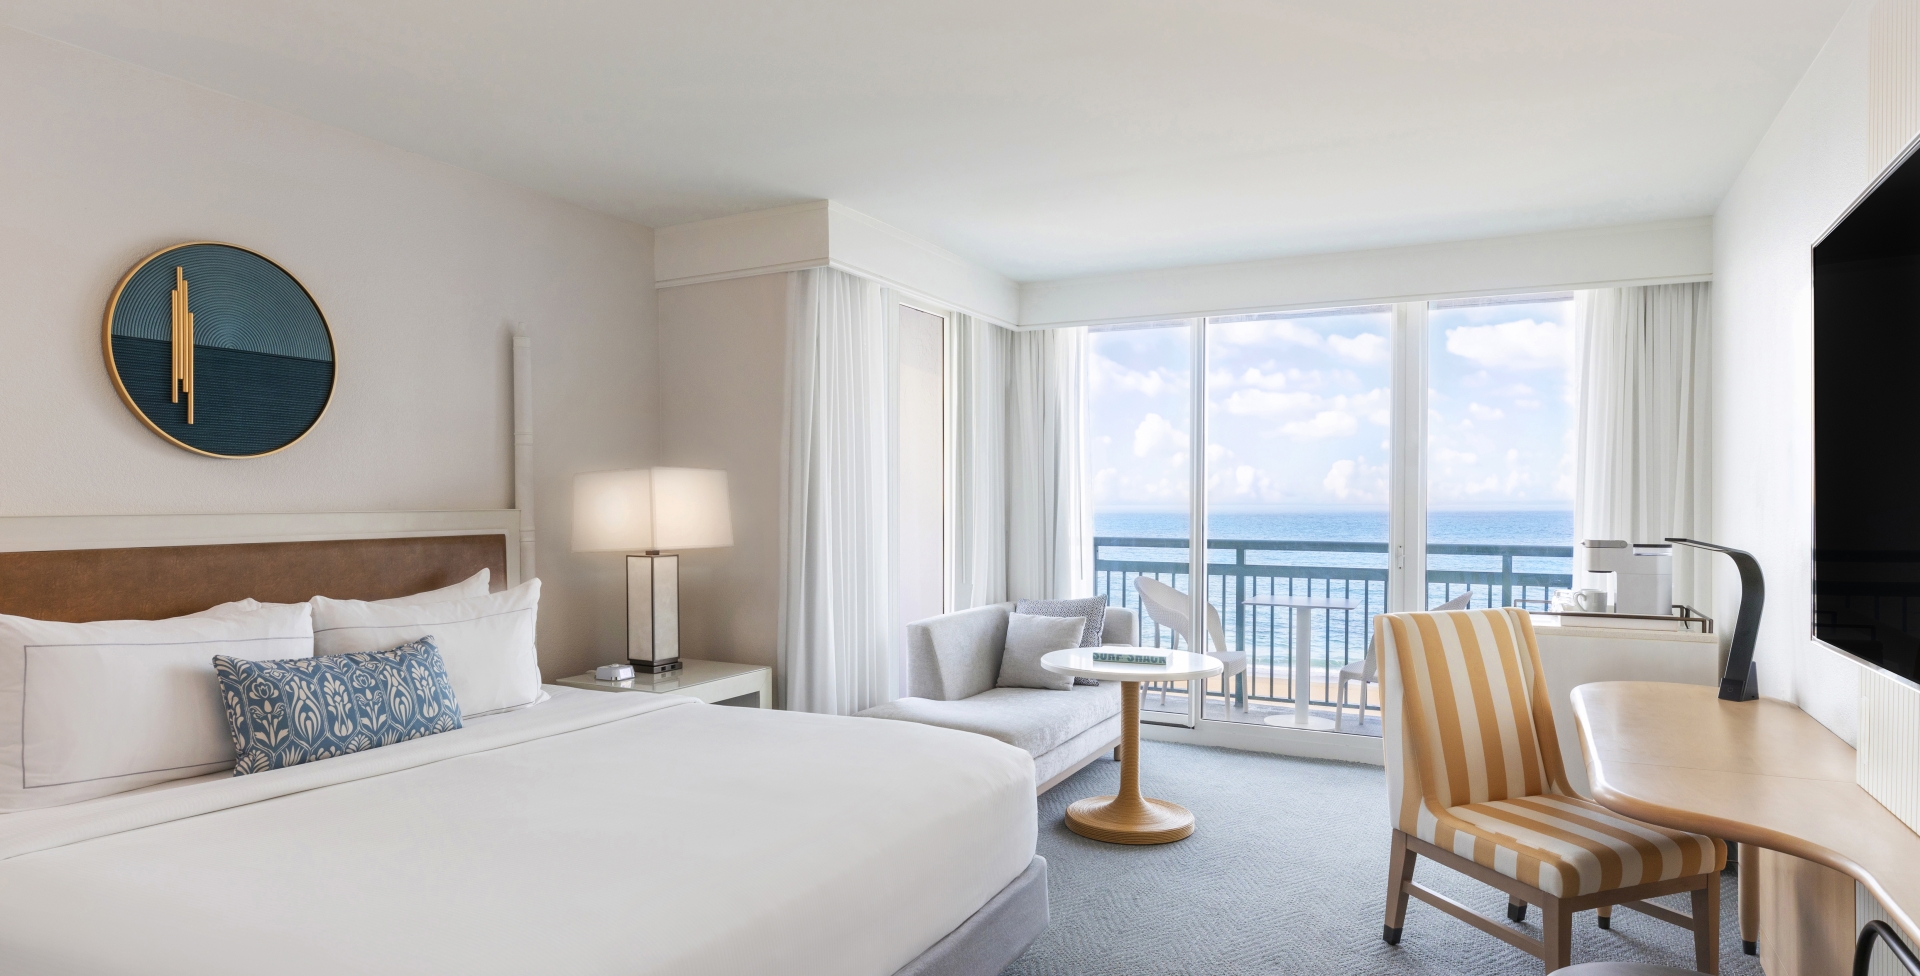 Spacious beachfront suite with panoramic ocean views and elegant decor at The Singer Resort in West Palm Beach